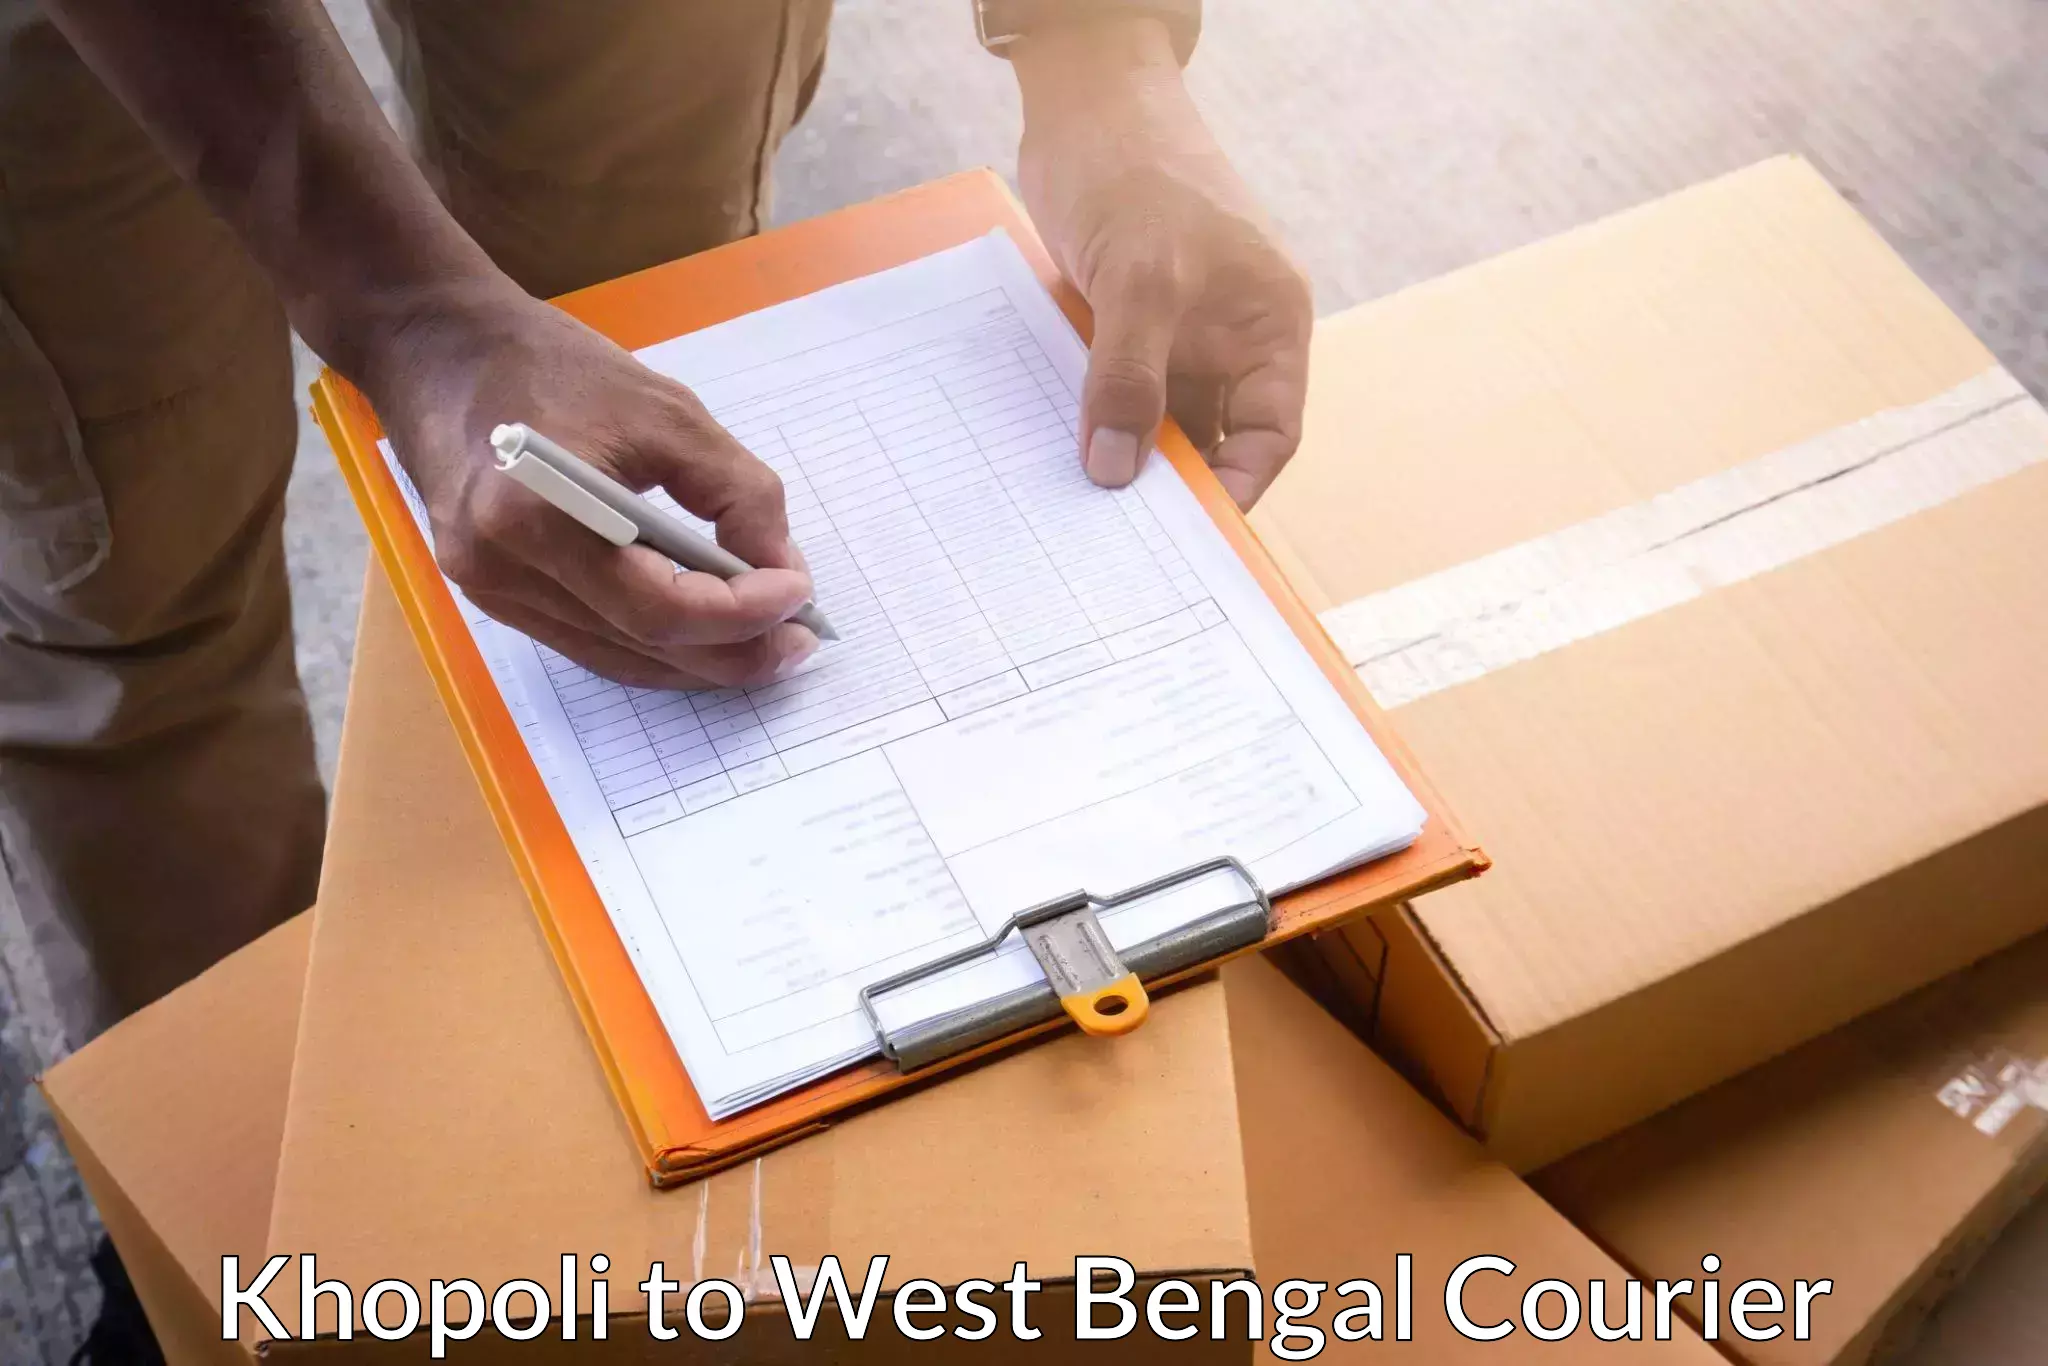 State-of-the-art courier technology Khopoli to Raniganj